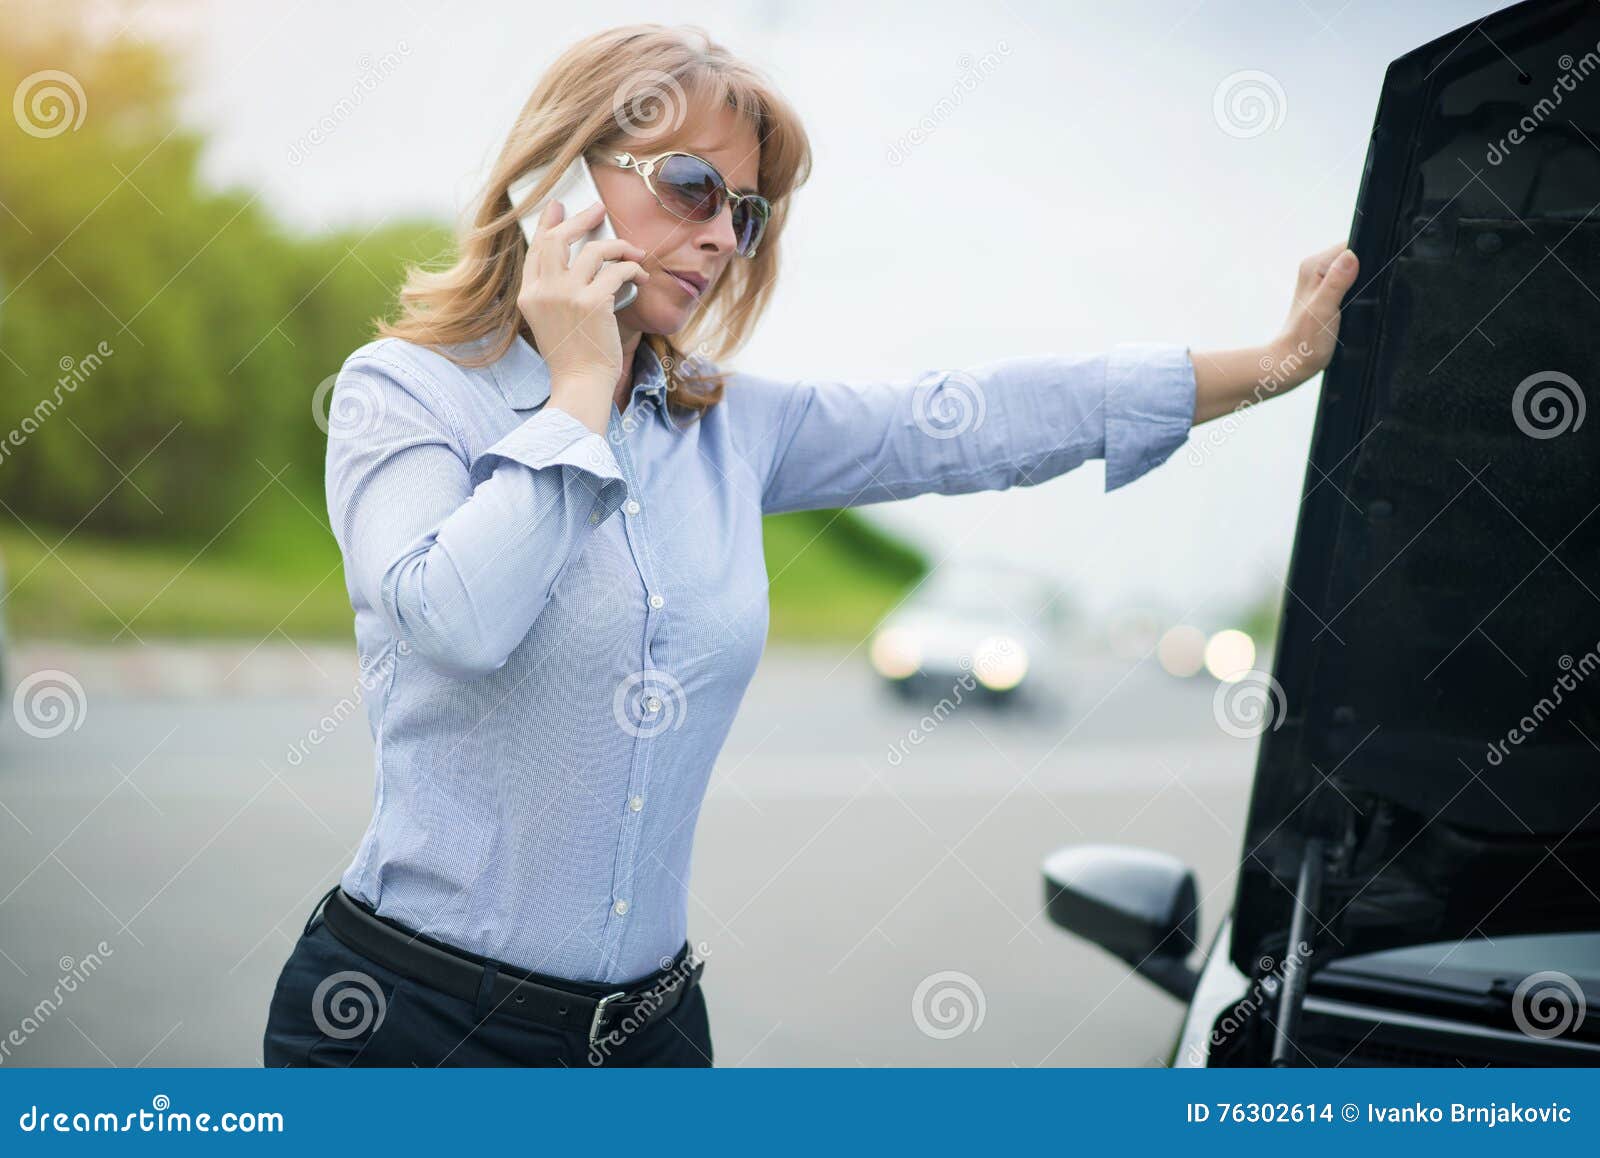 Mature Woman With Car Trouble Stock Photo Image Of People Female